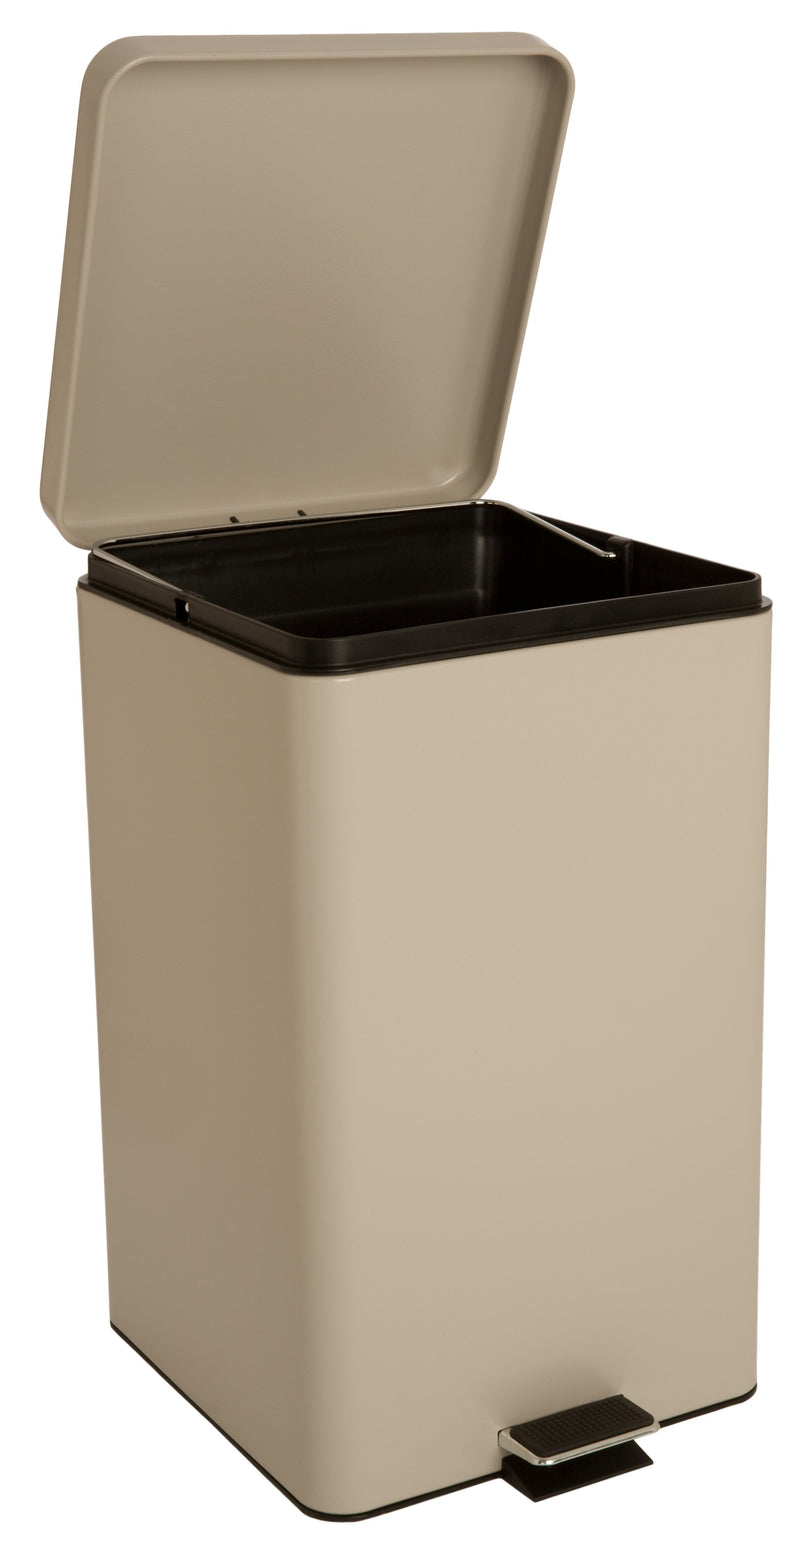 McKesson Trash Can with Plastic Liner, Square, Steel, Step-On, 32 QT, Beige -Each